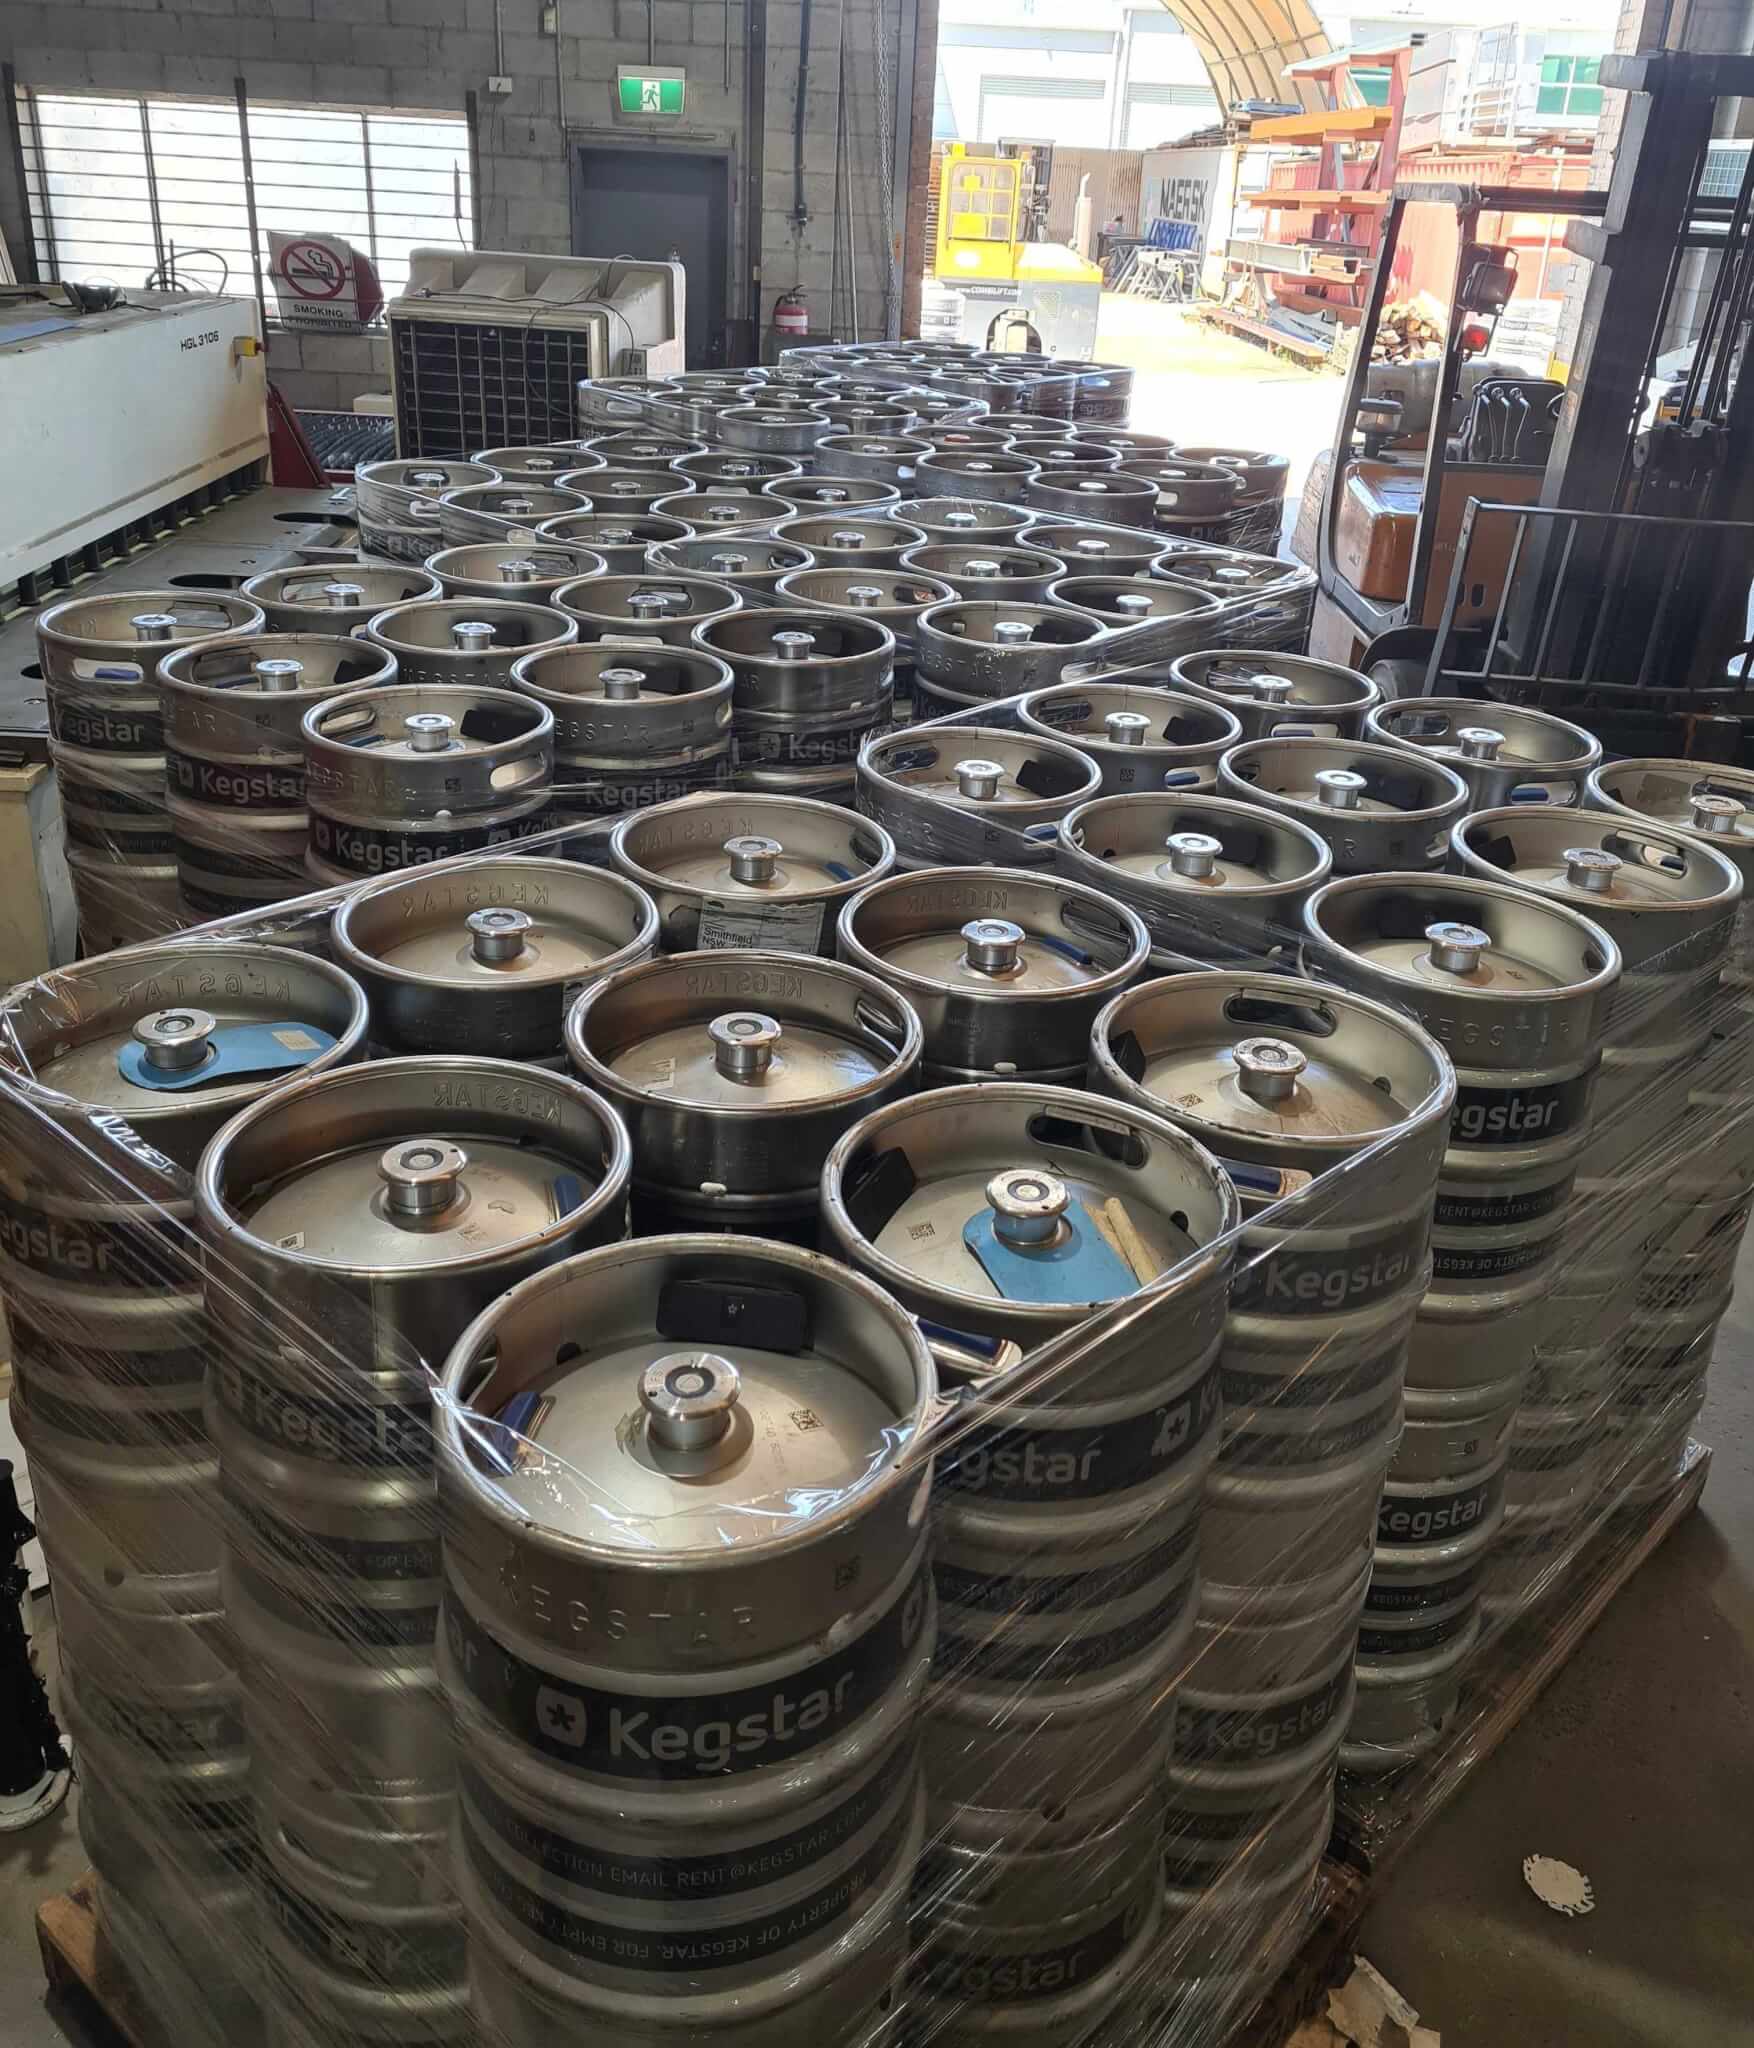 img-kegstar-Starlight kegs ready for delivery